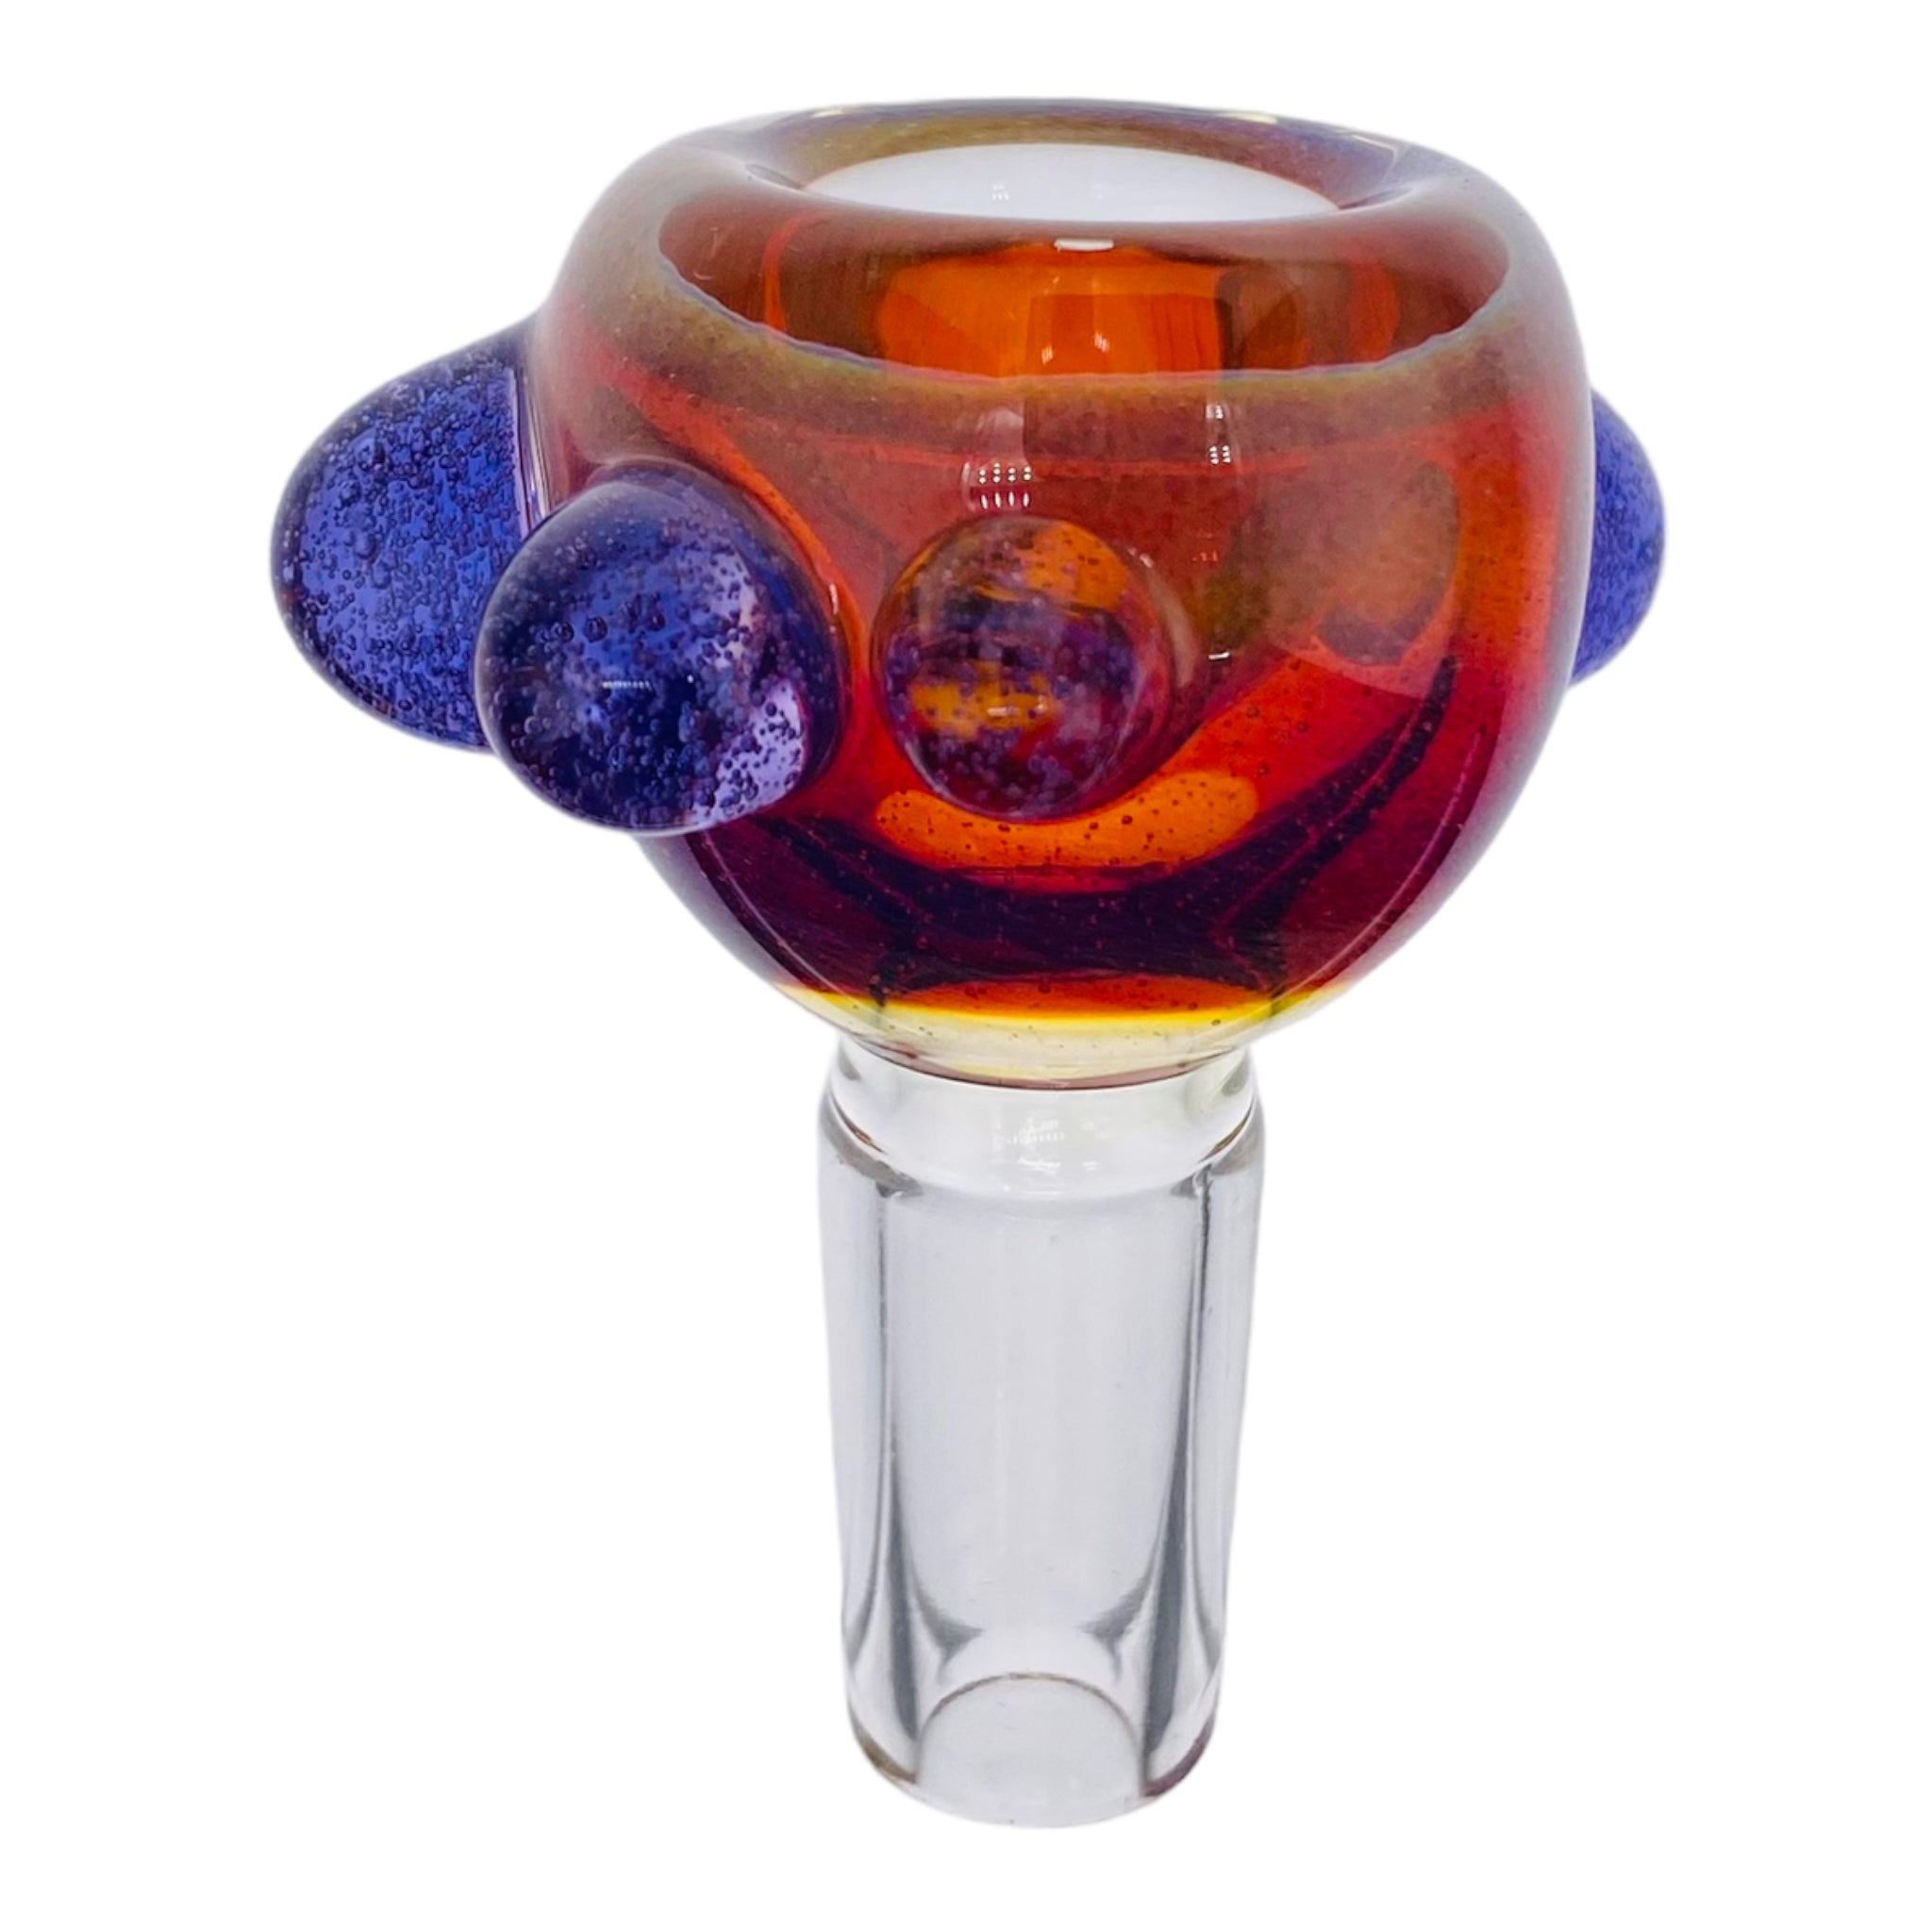 Arko Glass - 14mm Flower Bowl Amber Frit Bubble With Purple Dots